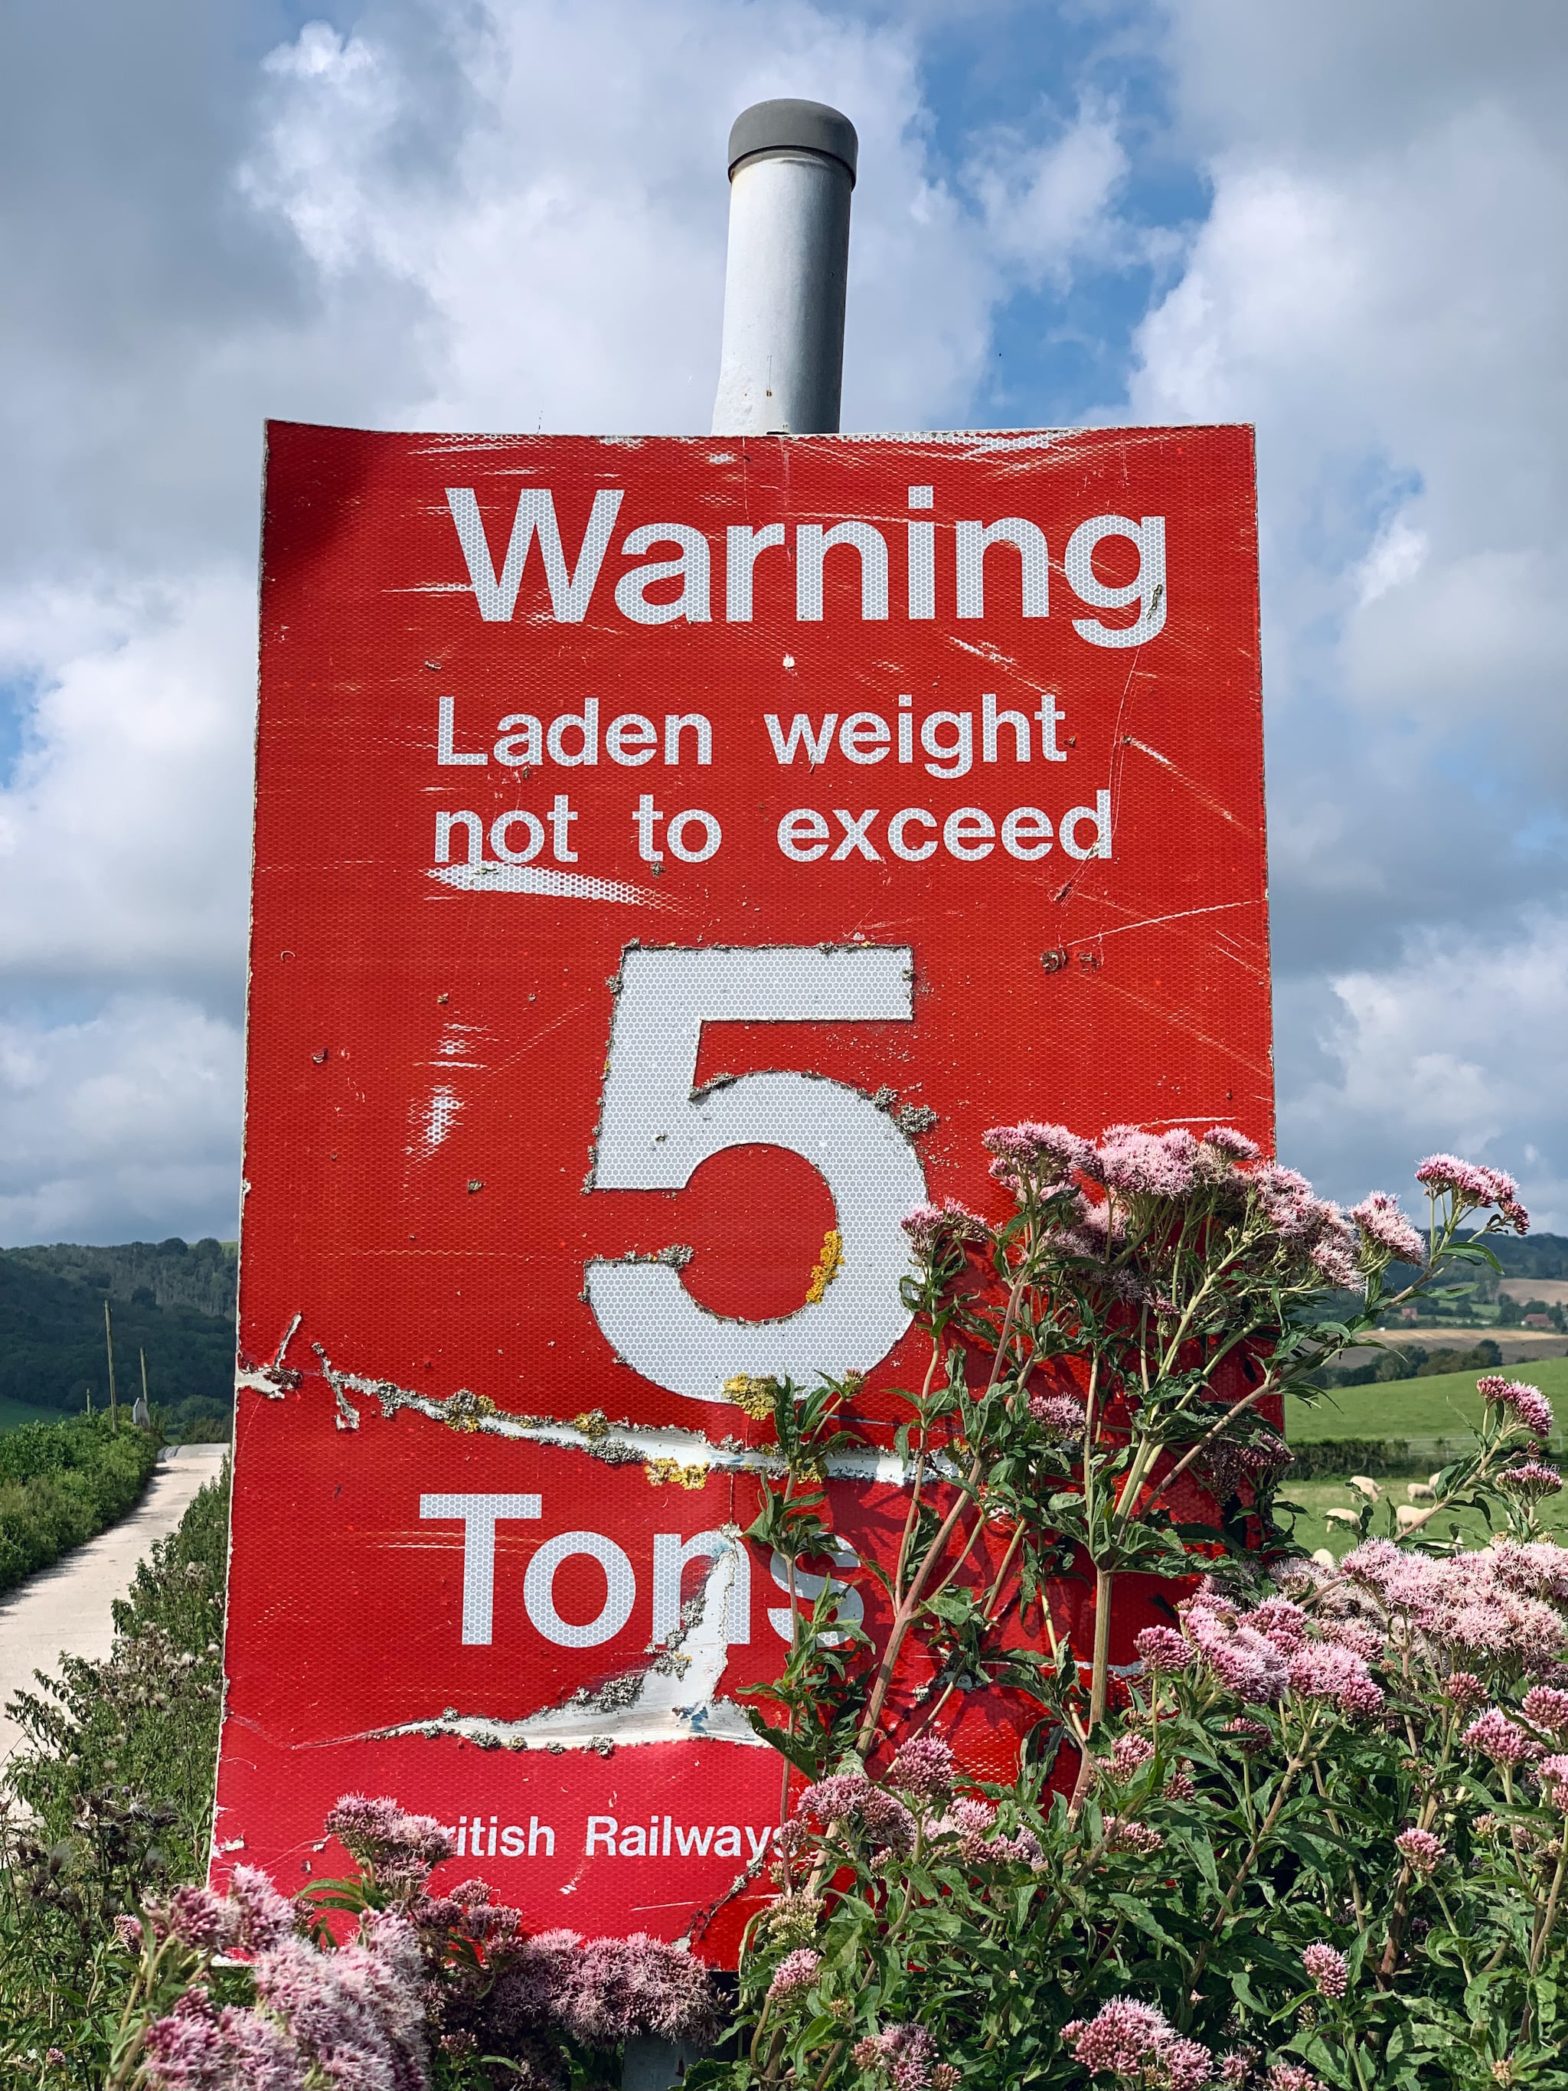 Red warning sign at a railway crossing that says: "Warning Laden weight not to exceed 5 Tons" framed by summertime flowers agains a backdrop of a blue sky